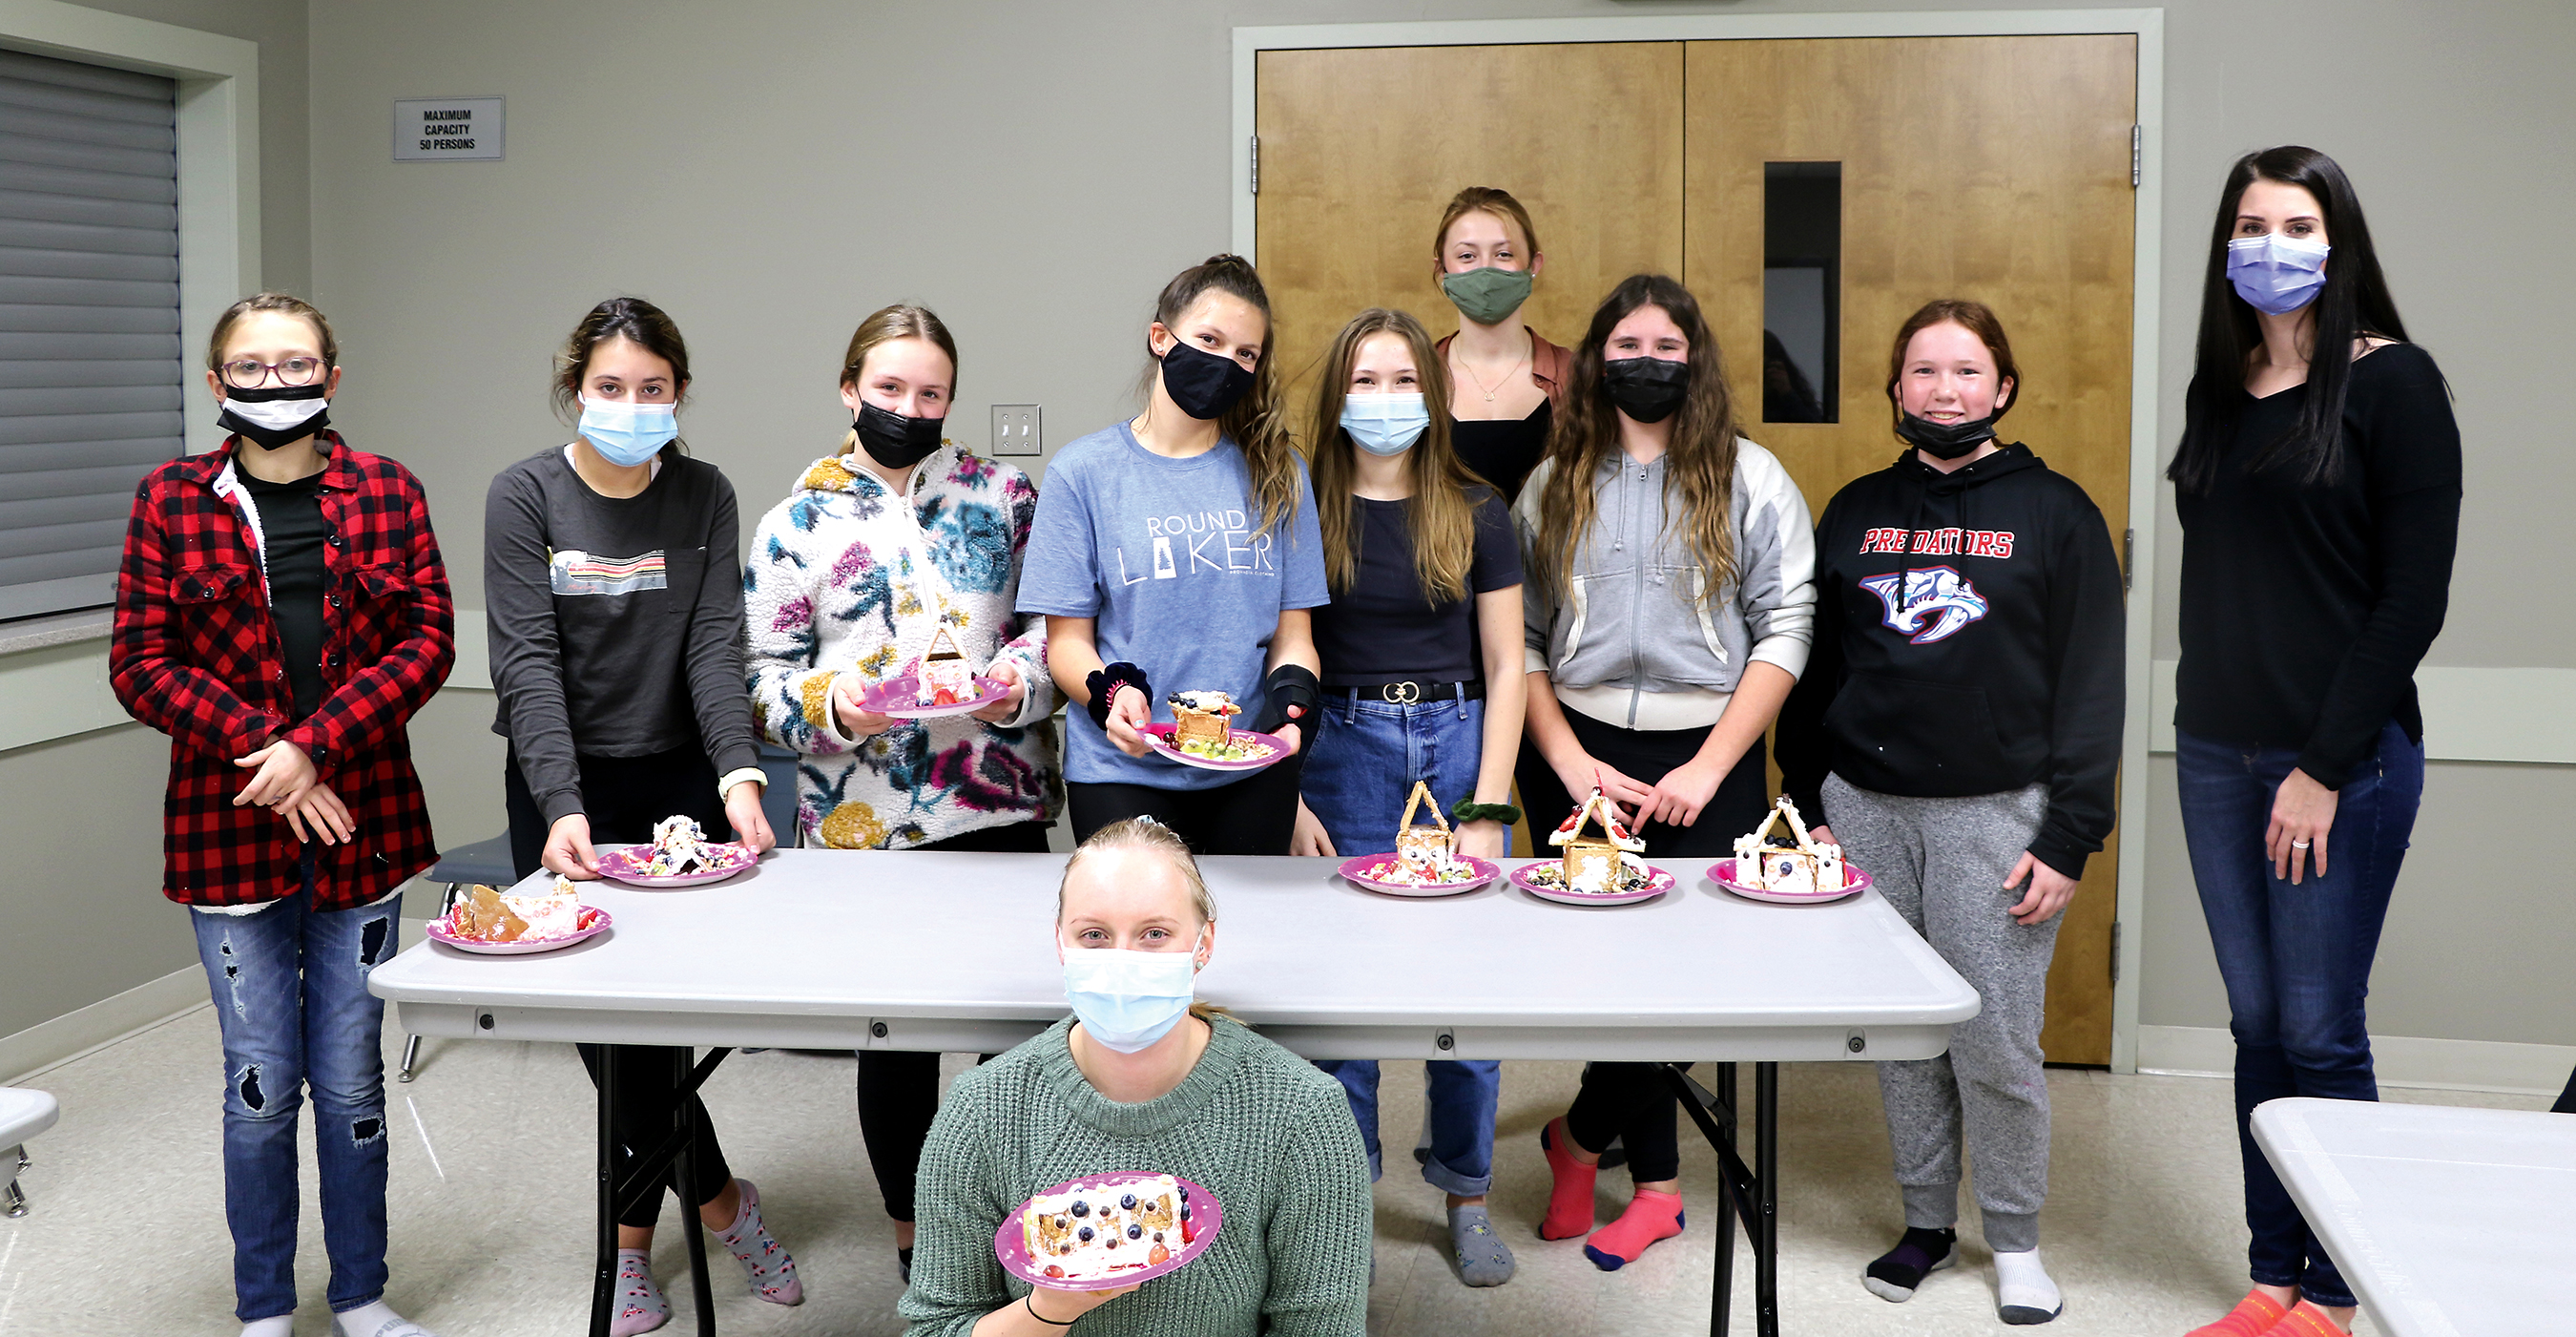 At this month’s HER Girl Club’s event hosted by Class with Cass Holistic Nutrition, the girls made healthy ginger bread houses. Left: Maya McMullen, Tess Nagy, Myla Woods, Kendall Shipp, Macy Rushton, Paige Hutchinson, Miley Bell and Jaz Koroscil, Kassidy Robidoux and Lauren van Dyke (bottom).